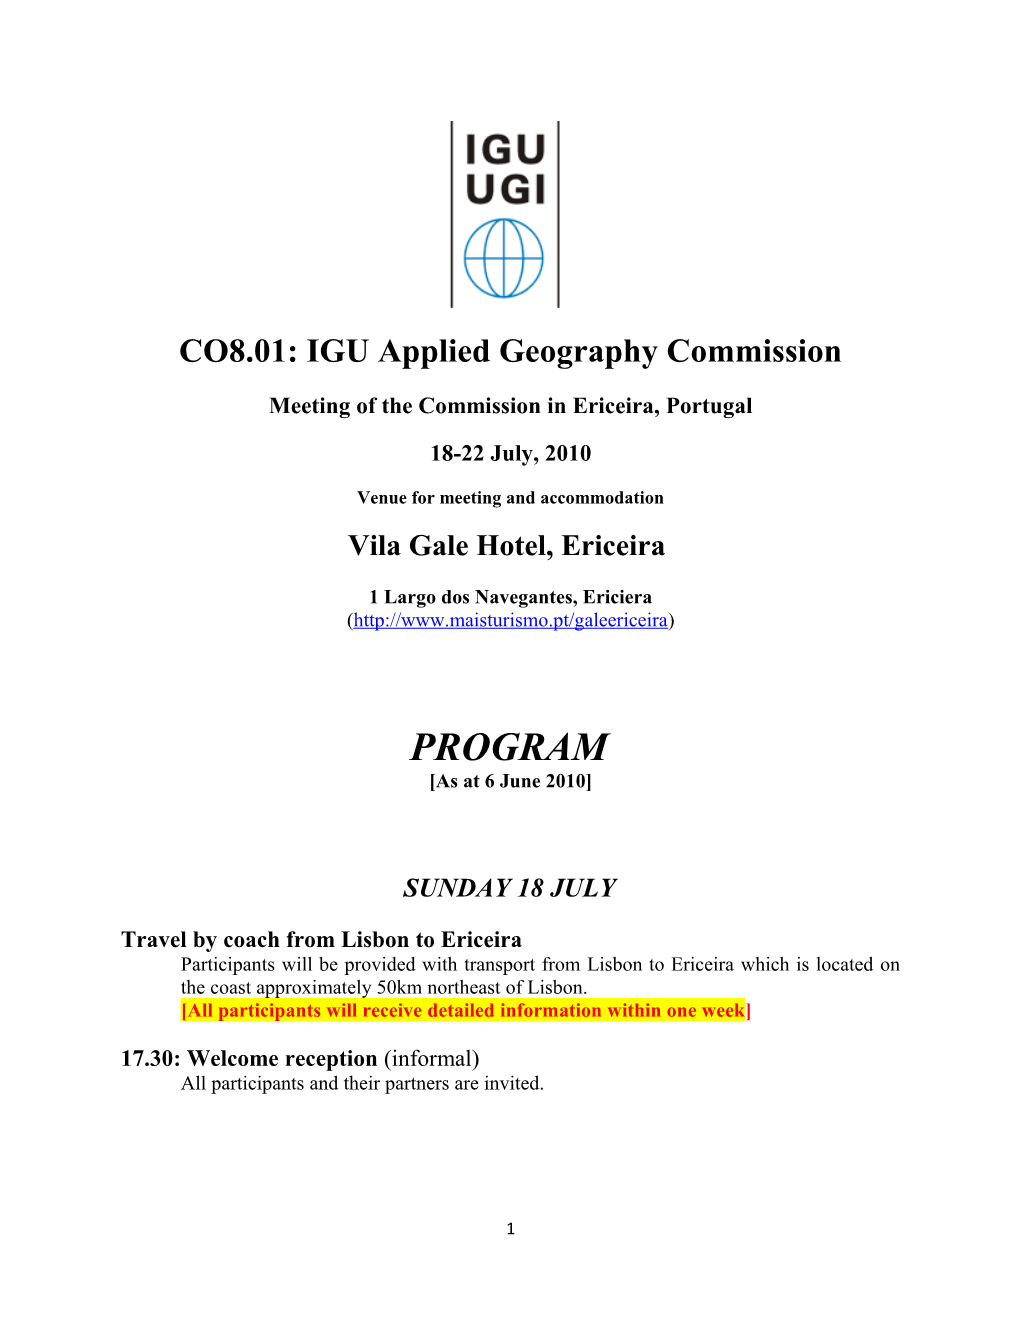 CO8.01: IGU Applied Geography Commission